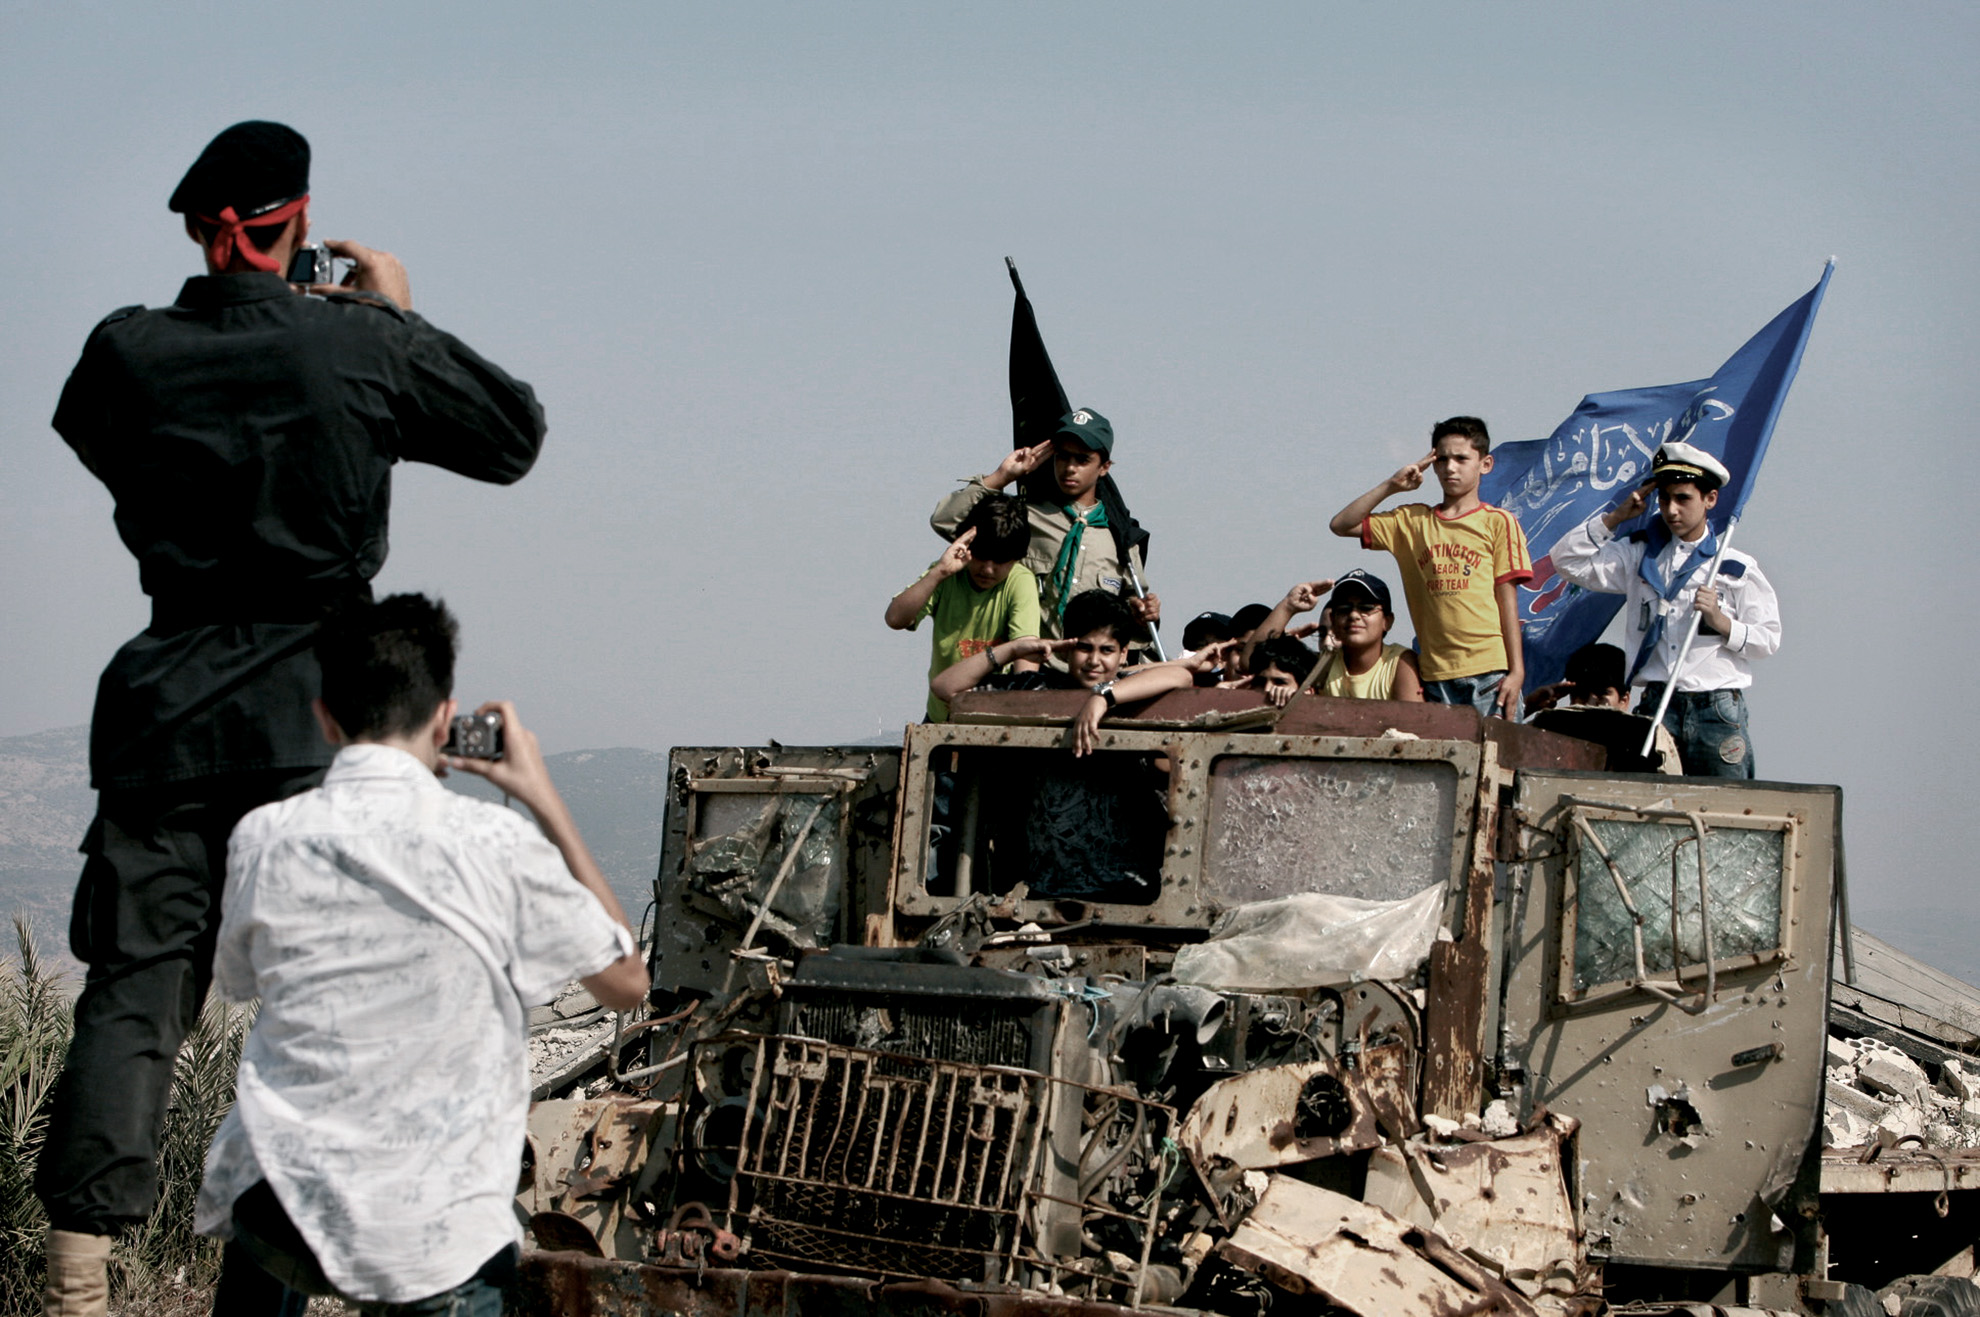 The photo shows a group of children posing on a truck destroyed in a bombing attack by the Israeli Defence Force inside the Kiham prison, south Lebanon. A Hezbollah militiaman took their photo after showing them the totally destroyed facility and telling them how Israeli soldiers used to torture Islamic prisoners there.